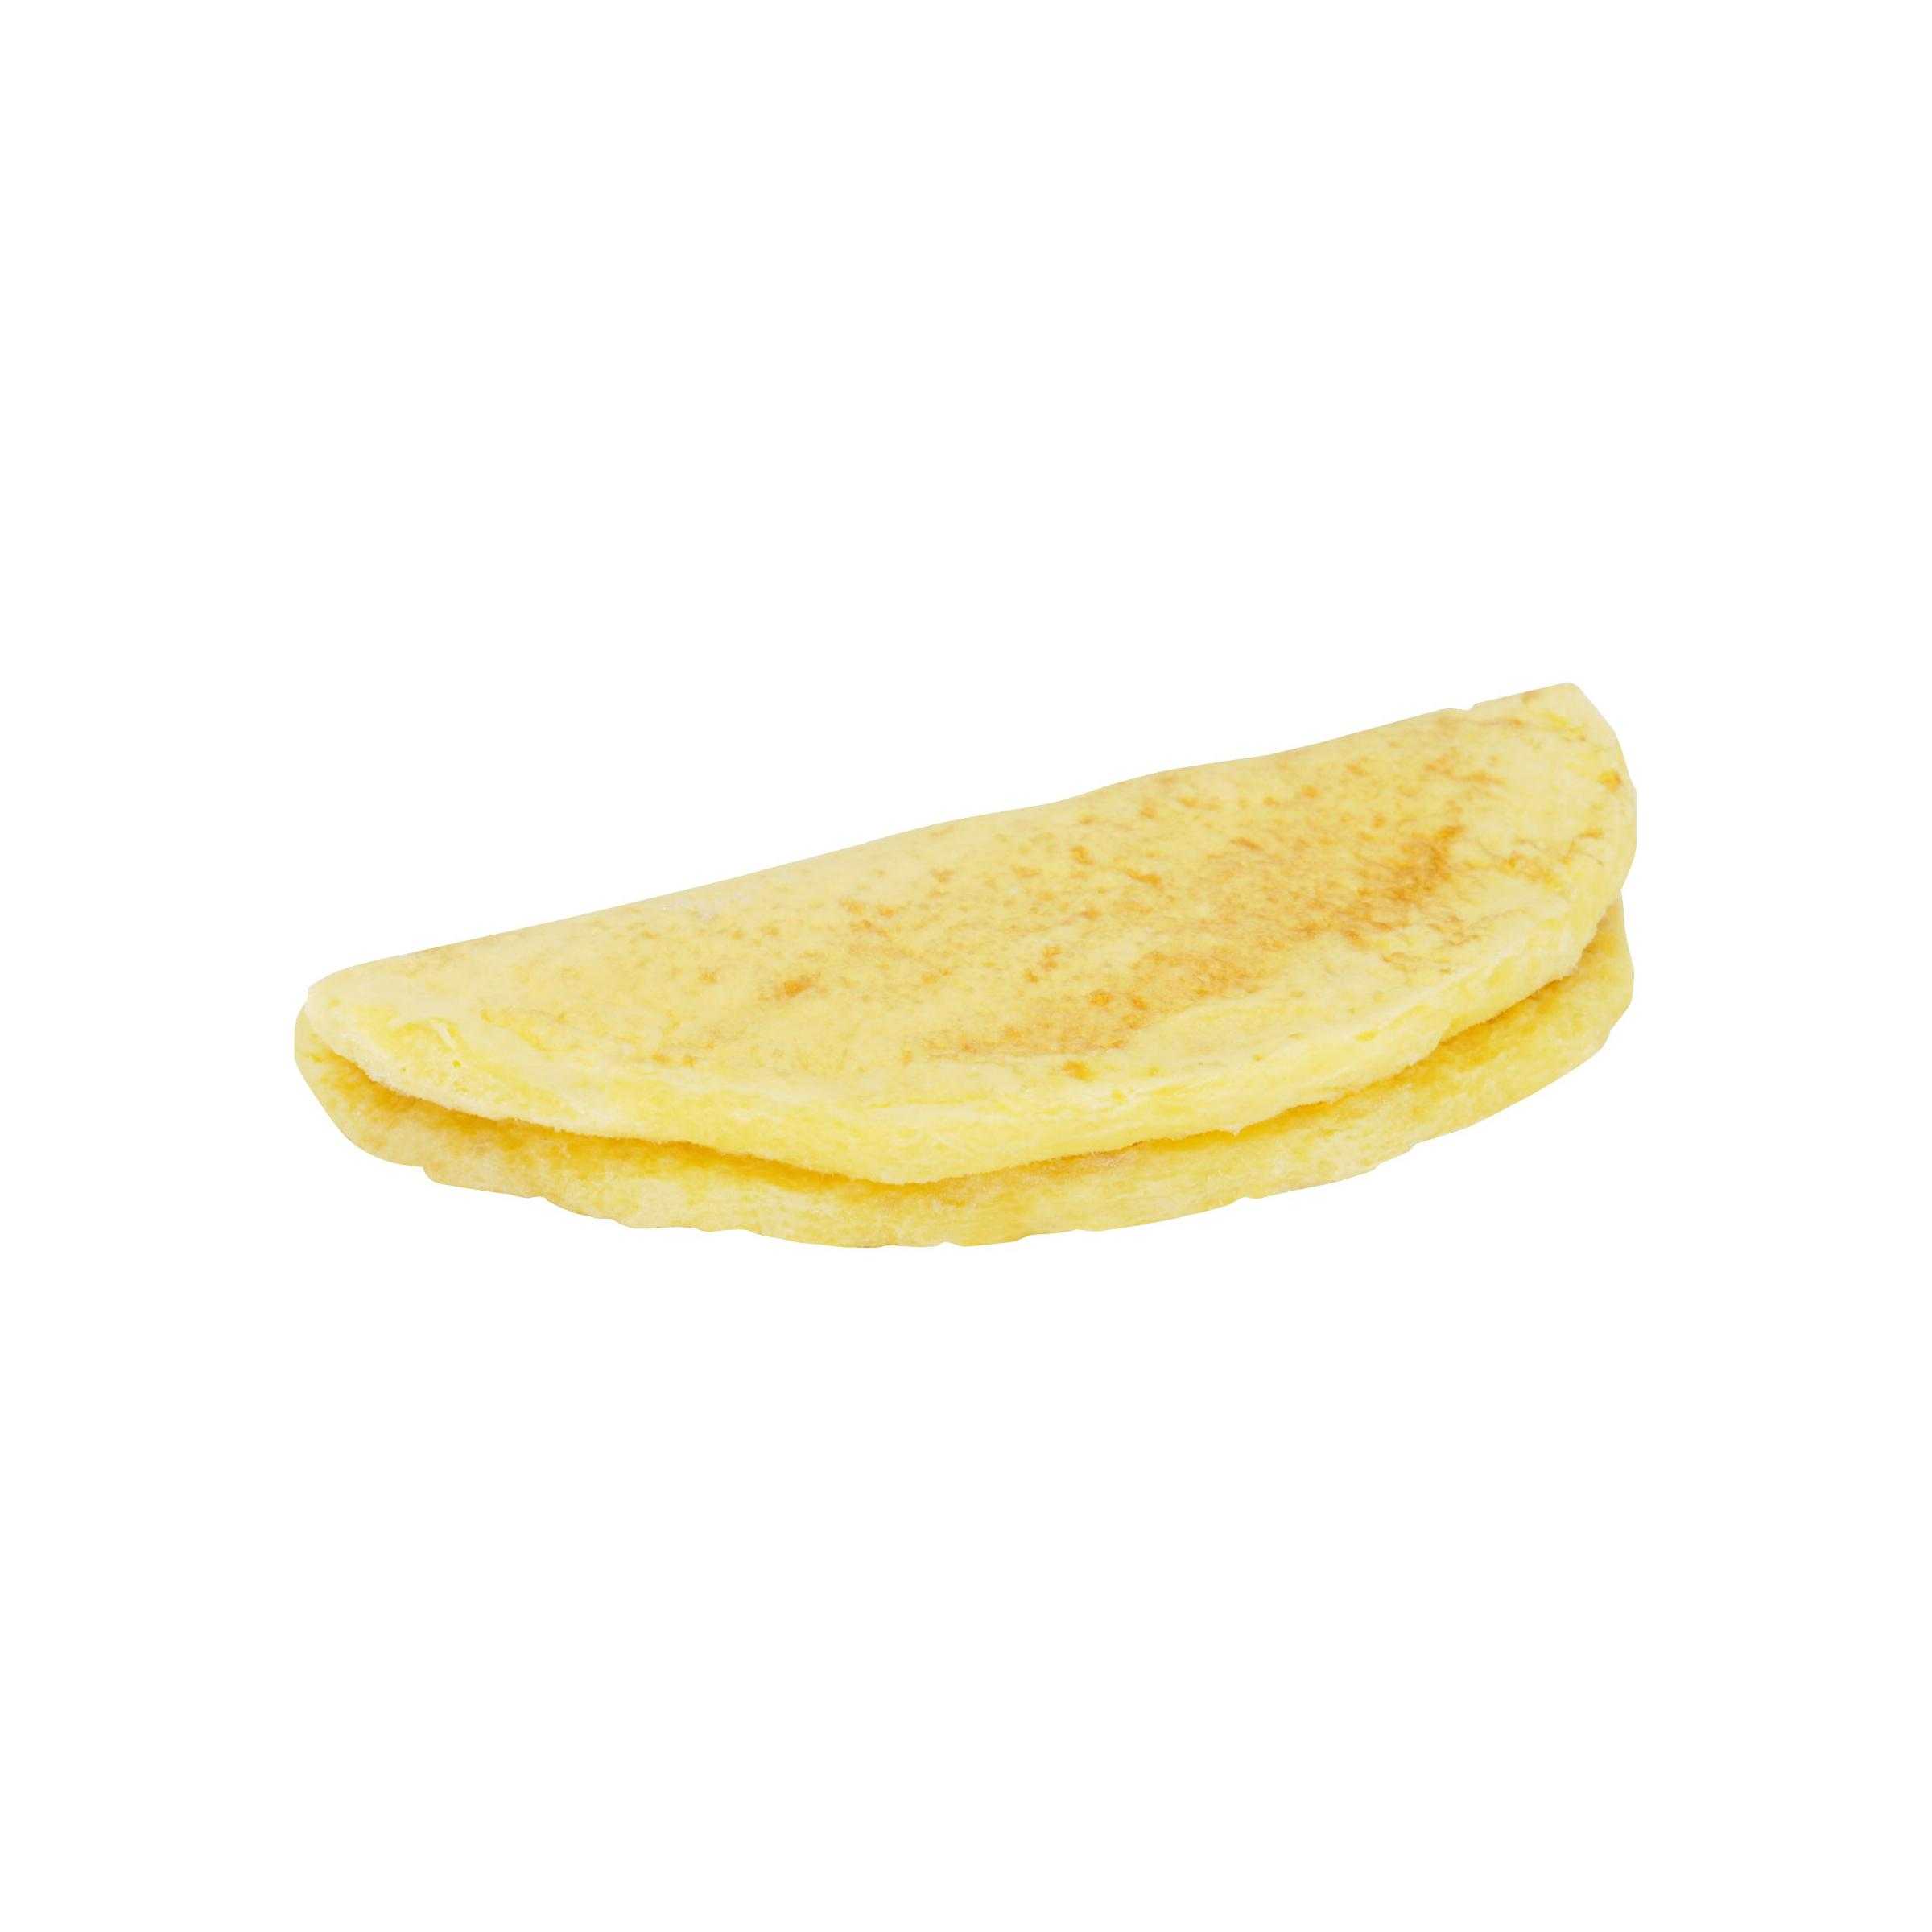 Papetti’s® Cooked 5” Scrambled Egg Omelet filled with Colby Cheese, K12, 144/2.1 Oz